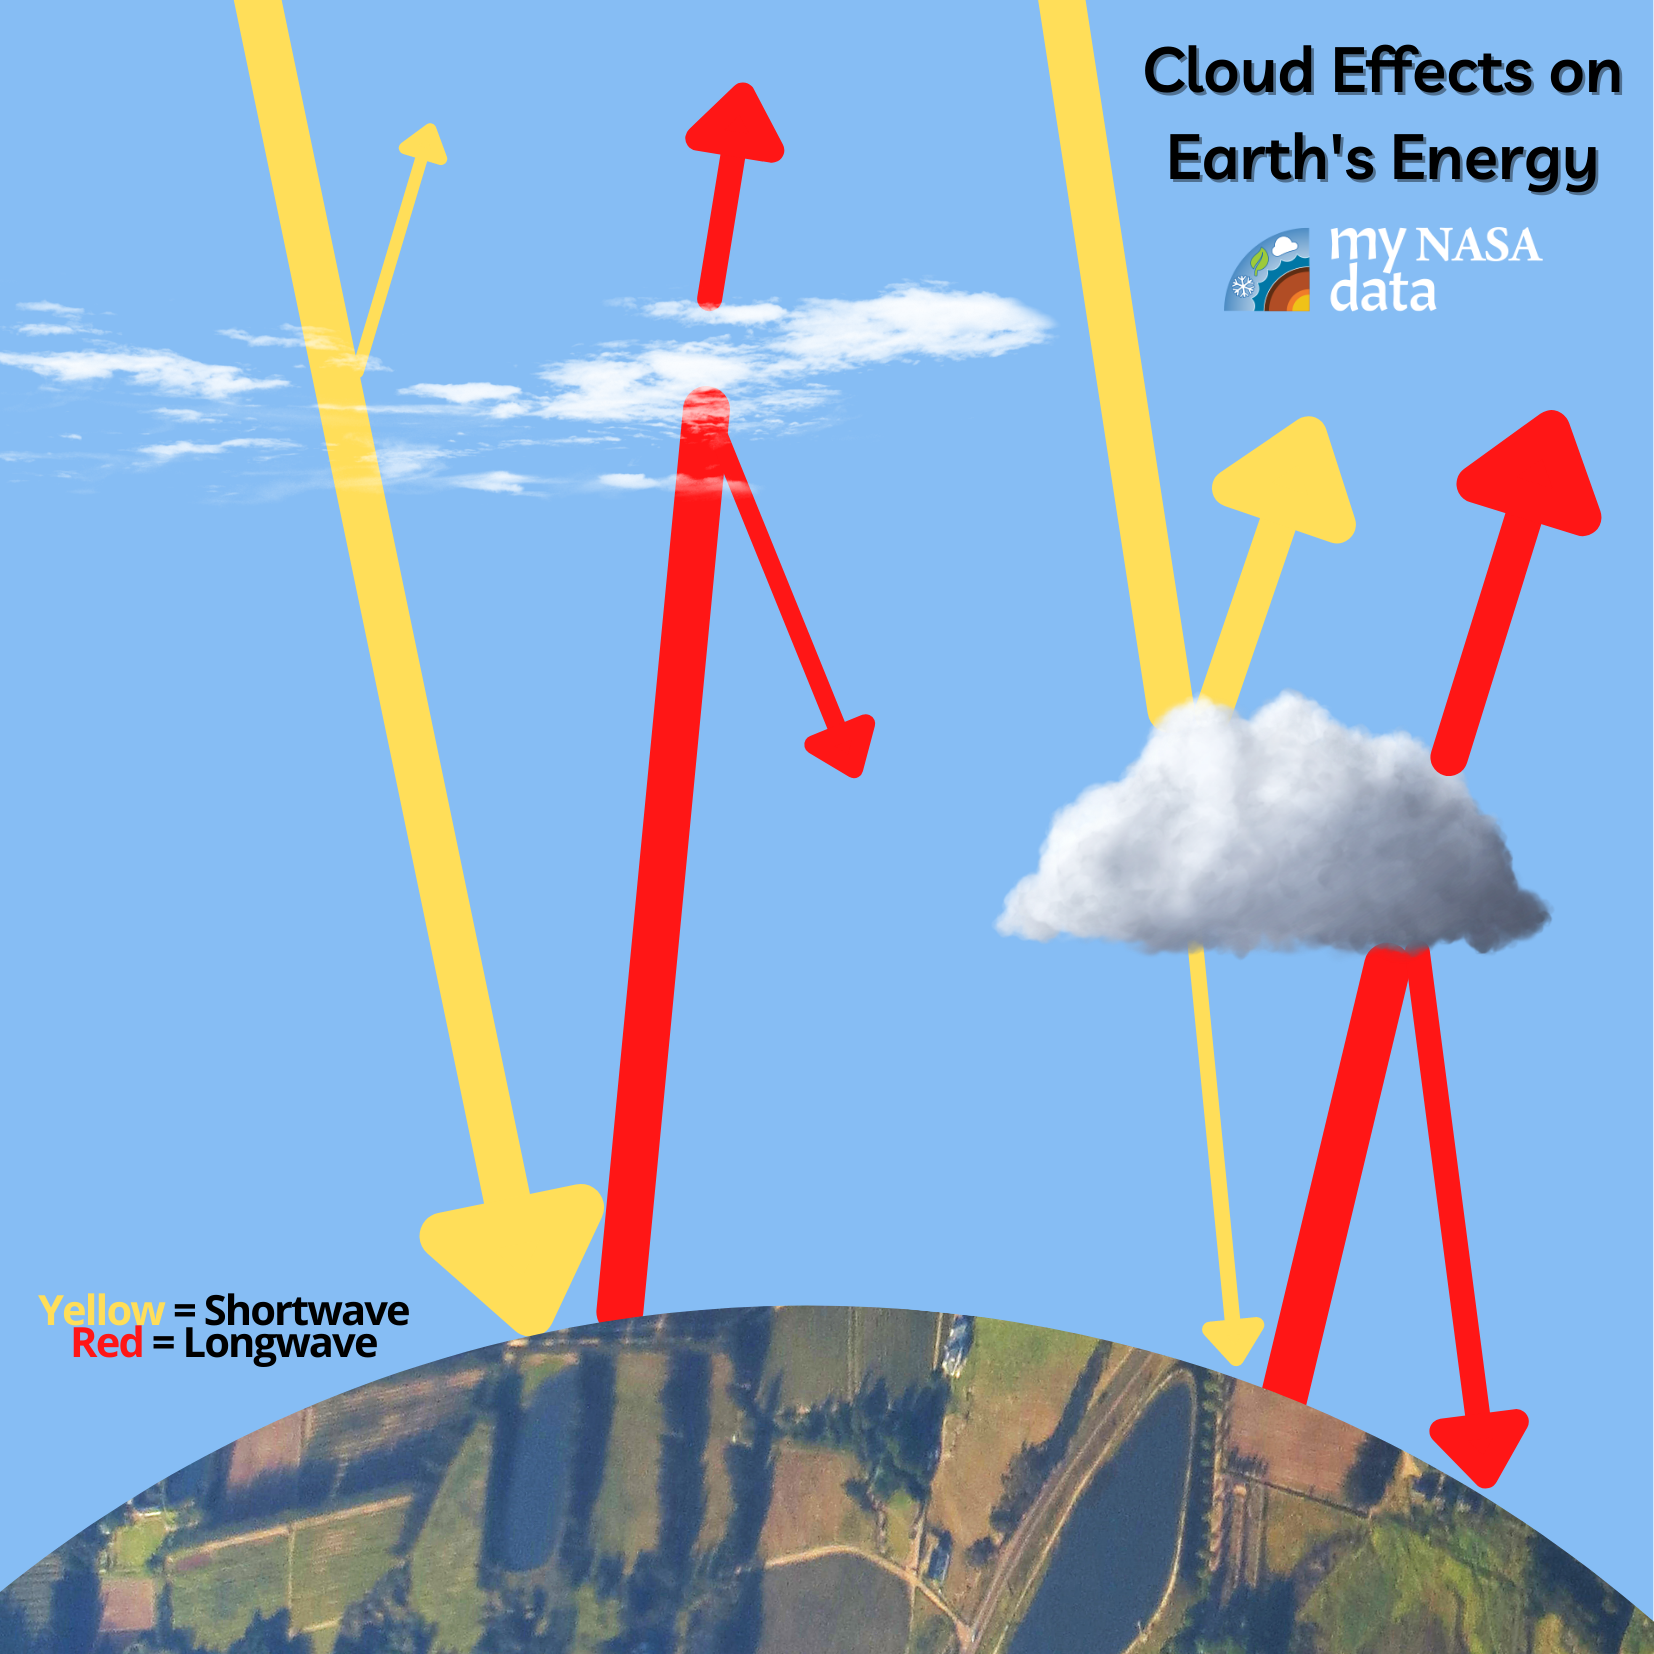 Cloud Effects on Earth's Energy